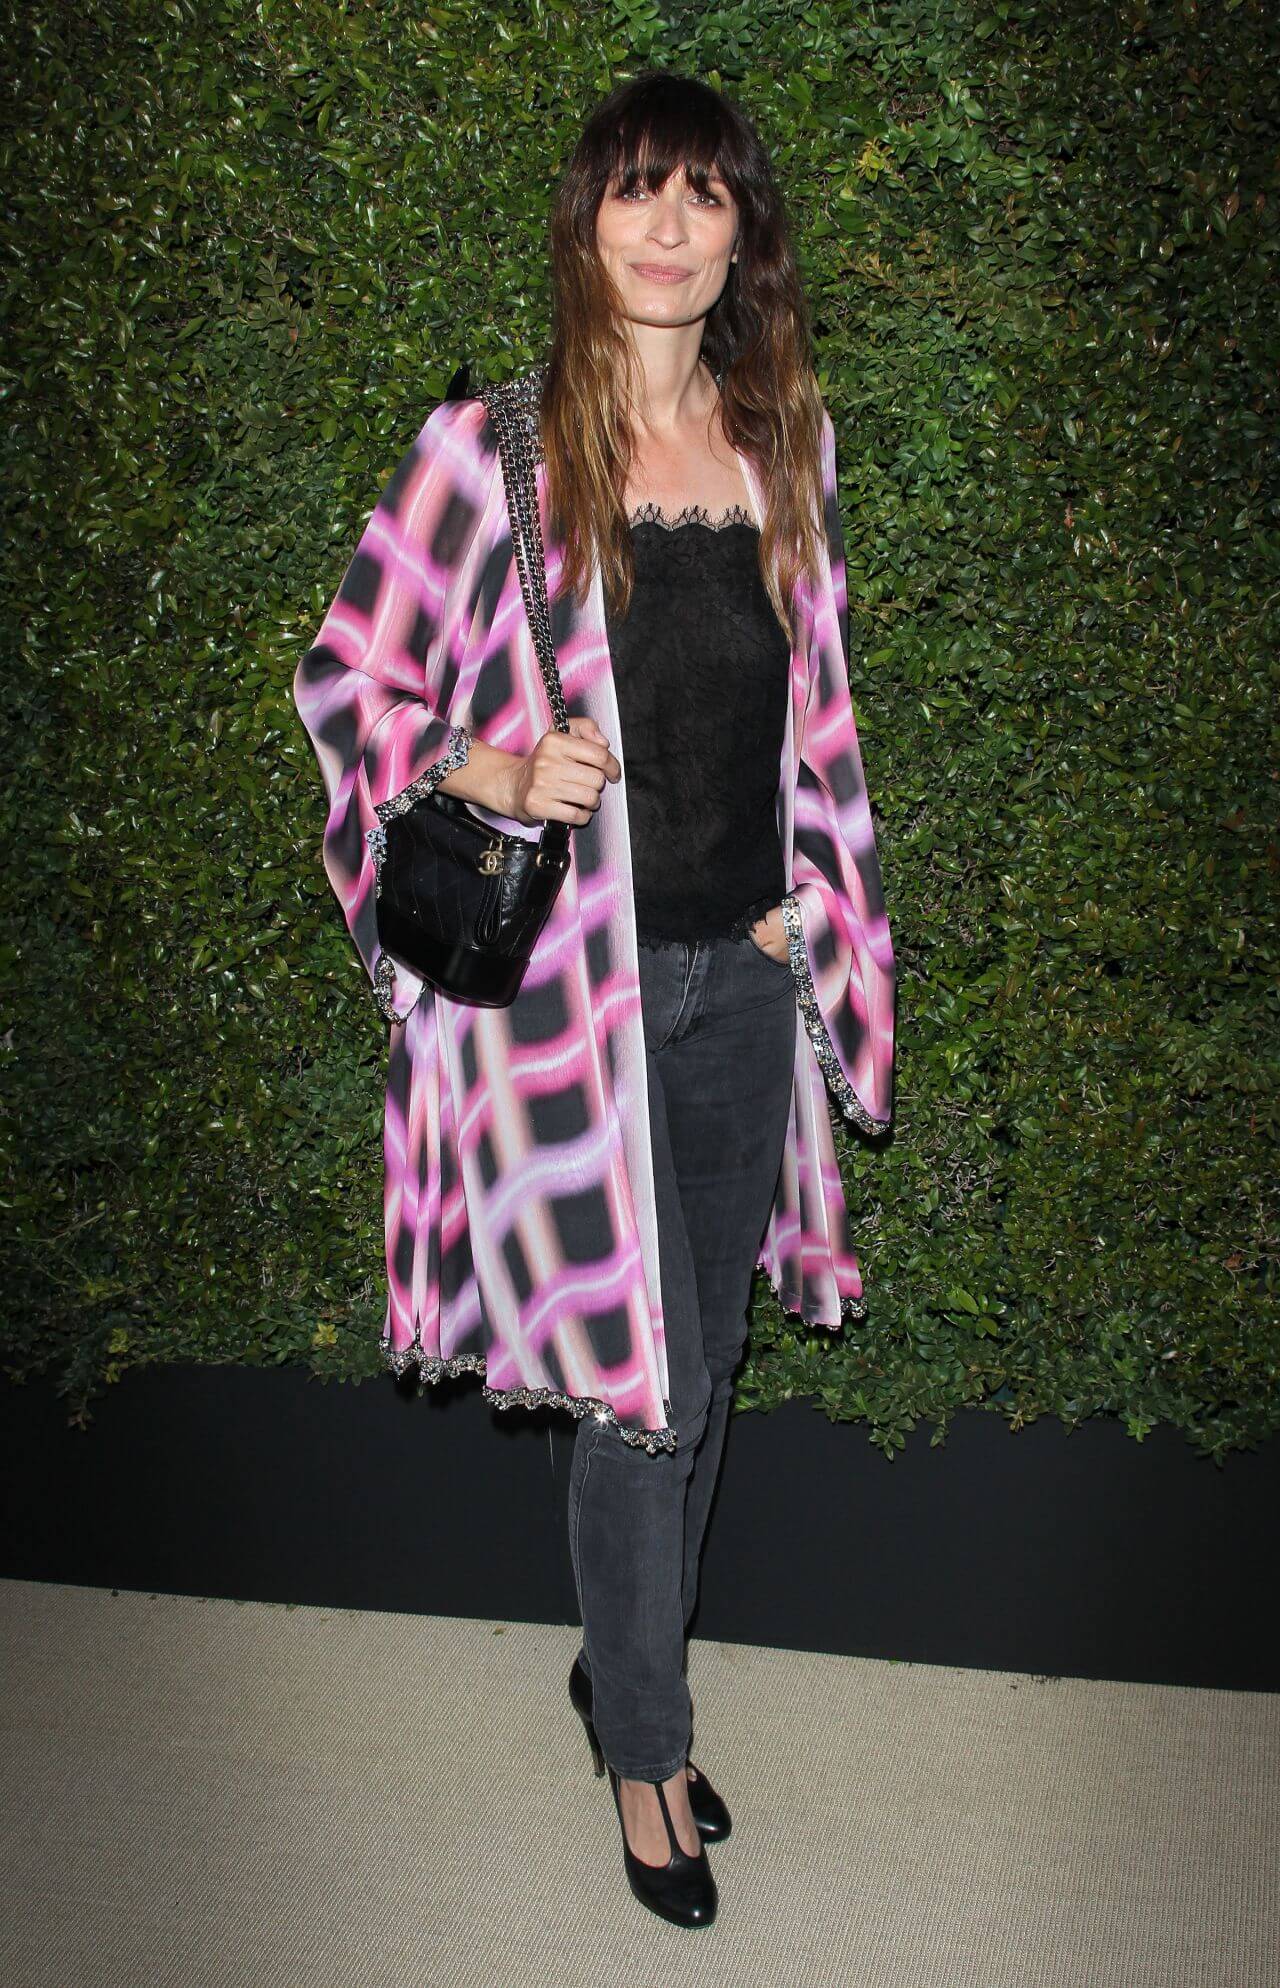 Caroline de Maigret In Pink Checked Long Shrug With Black Top & Jeans At Chanel Dinner in Los Angeles,